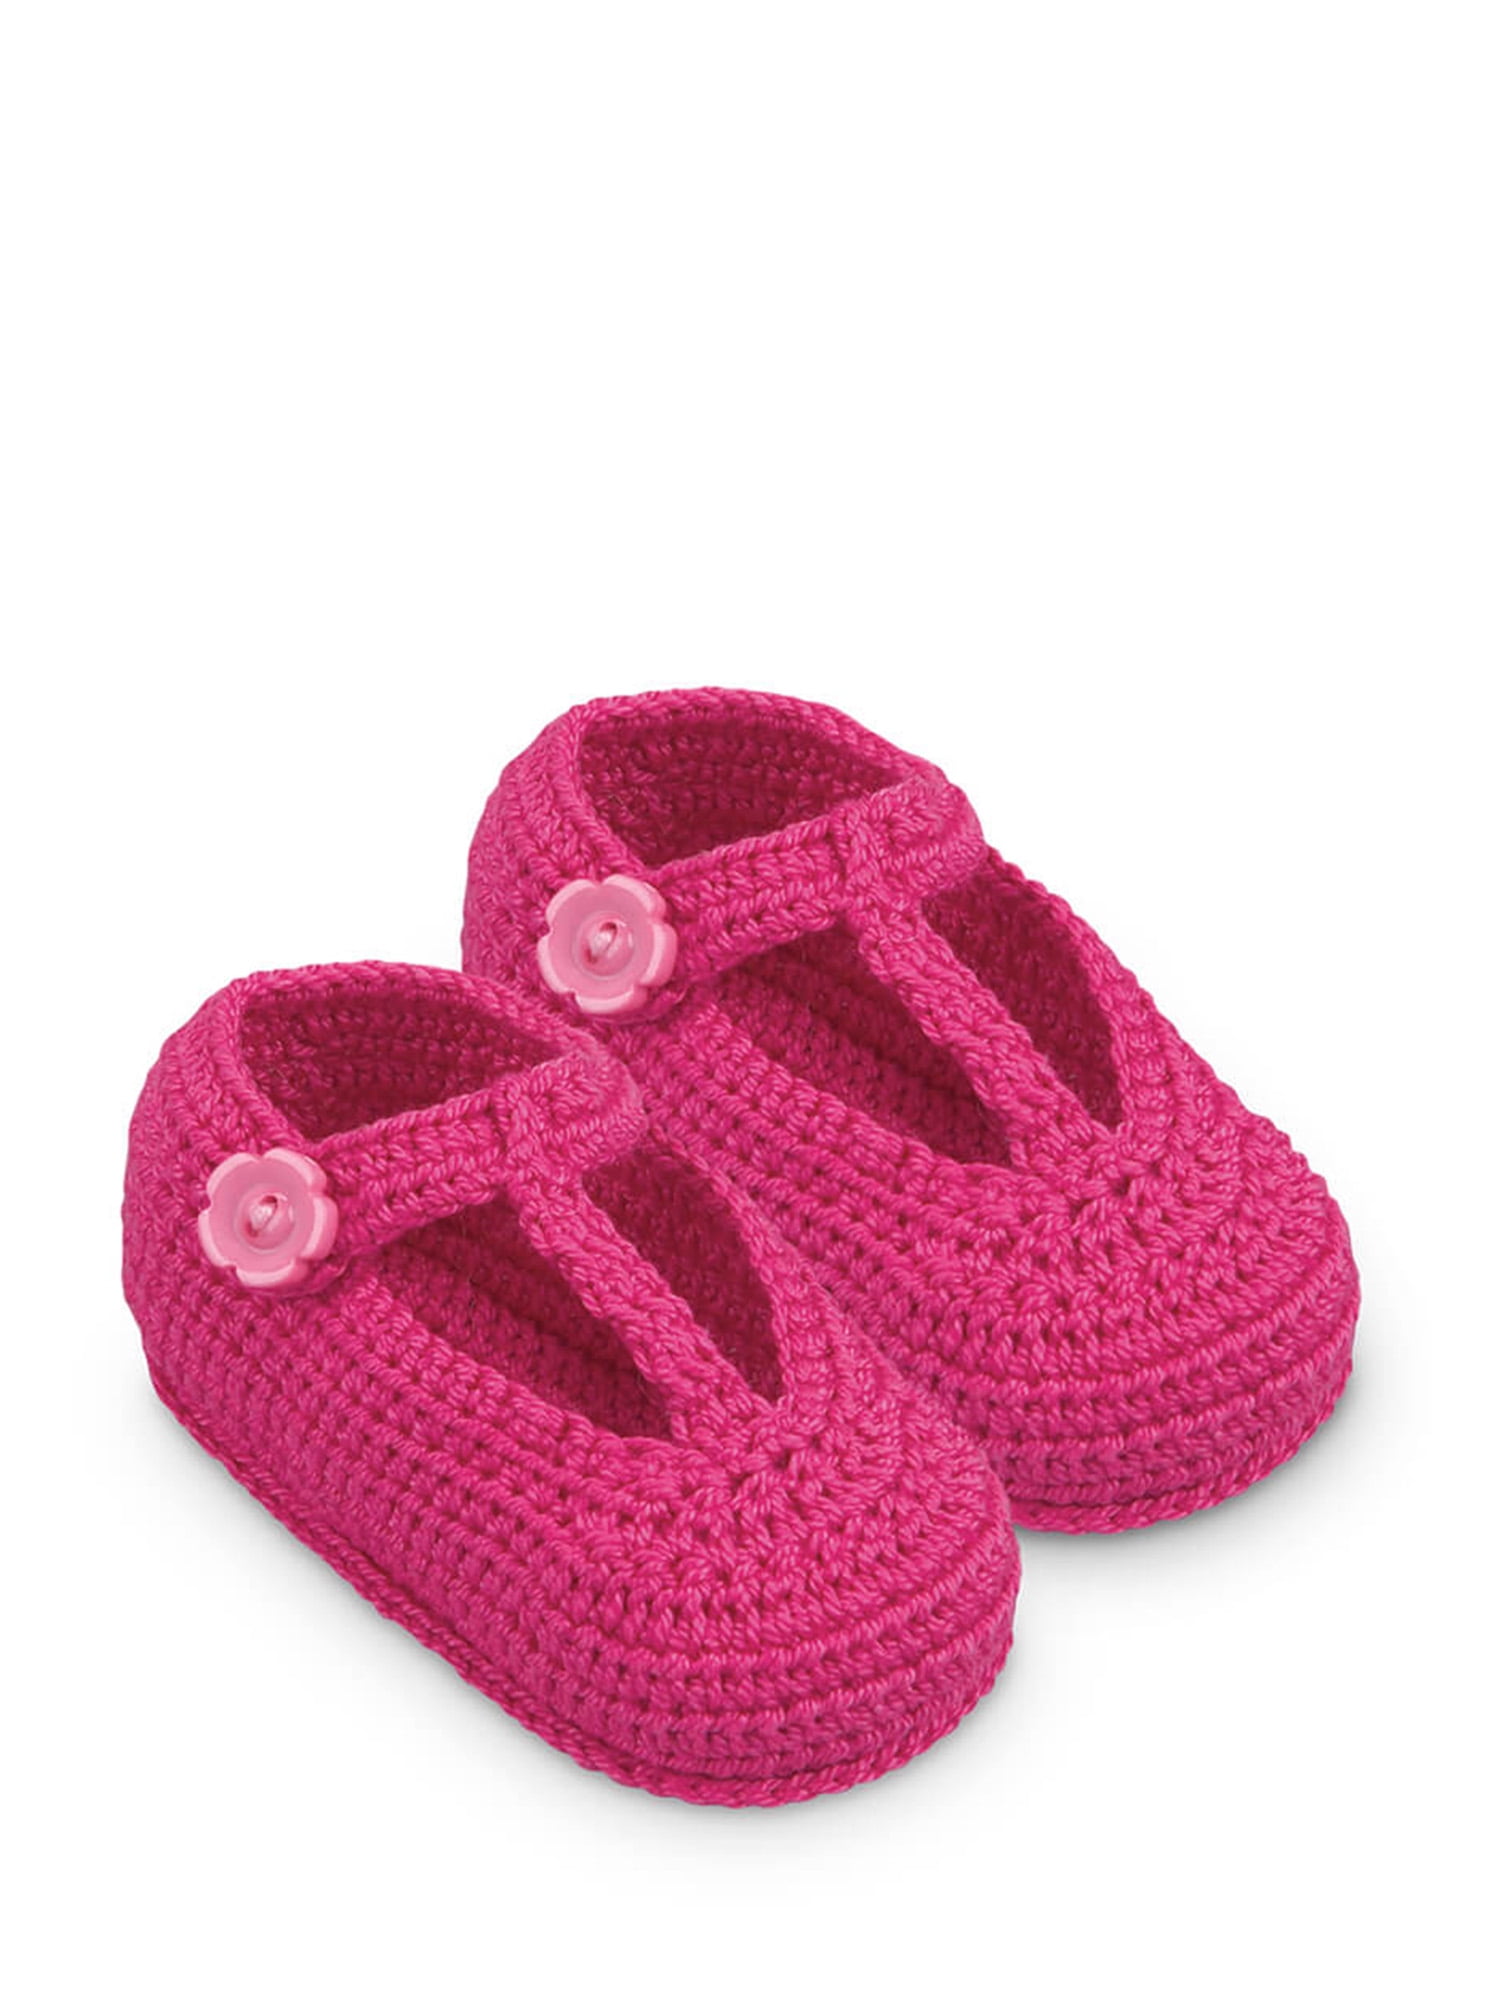 HANDMADE CROCHET BABY FIRST SHOES WOOL CASUAL BOOTS SLIPPERS TRAINERS UNISEX 